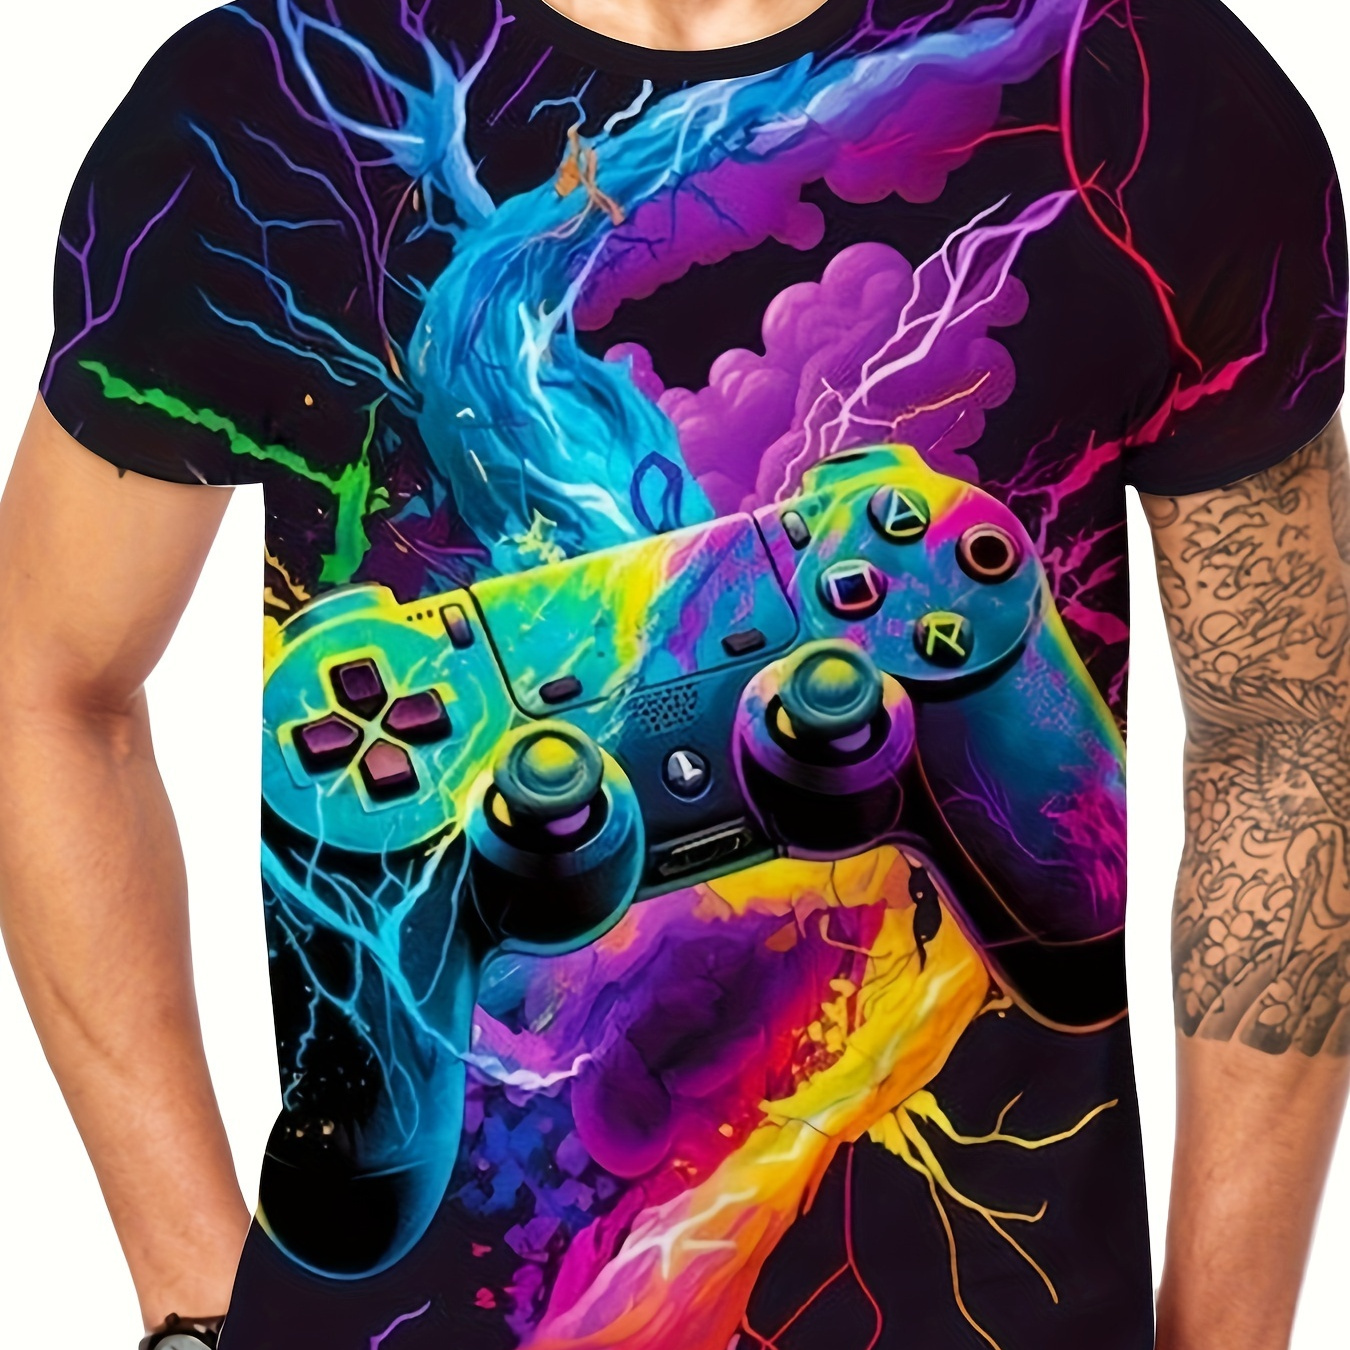 

Gamepad Print, Men's Graphic Design Crew Neck Active T-shirt, Casual Comfy Tees Tshirts For Summer, Men's Clothing Tops For Daily Gym Workout Running